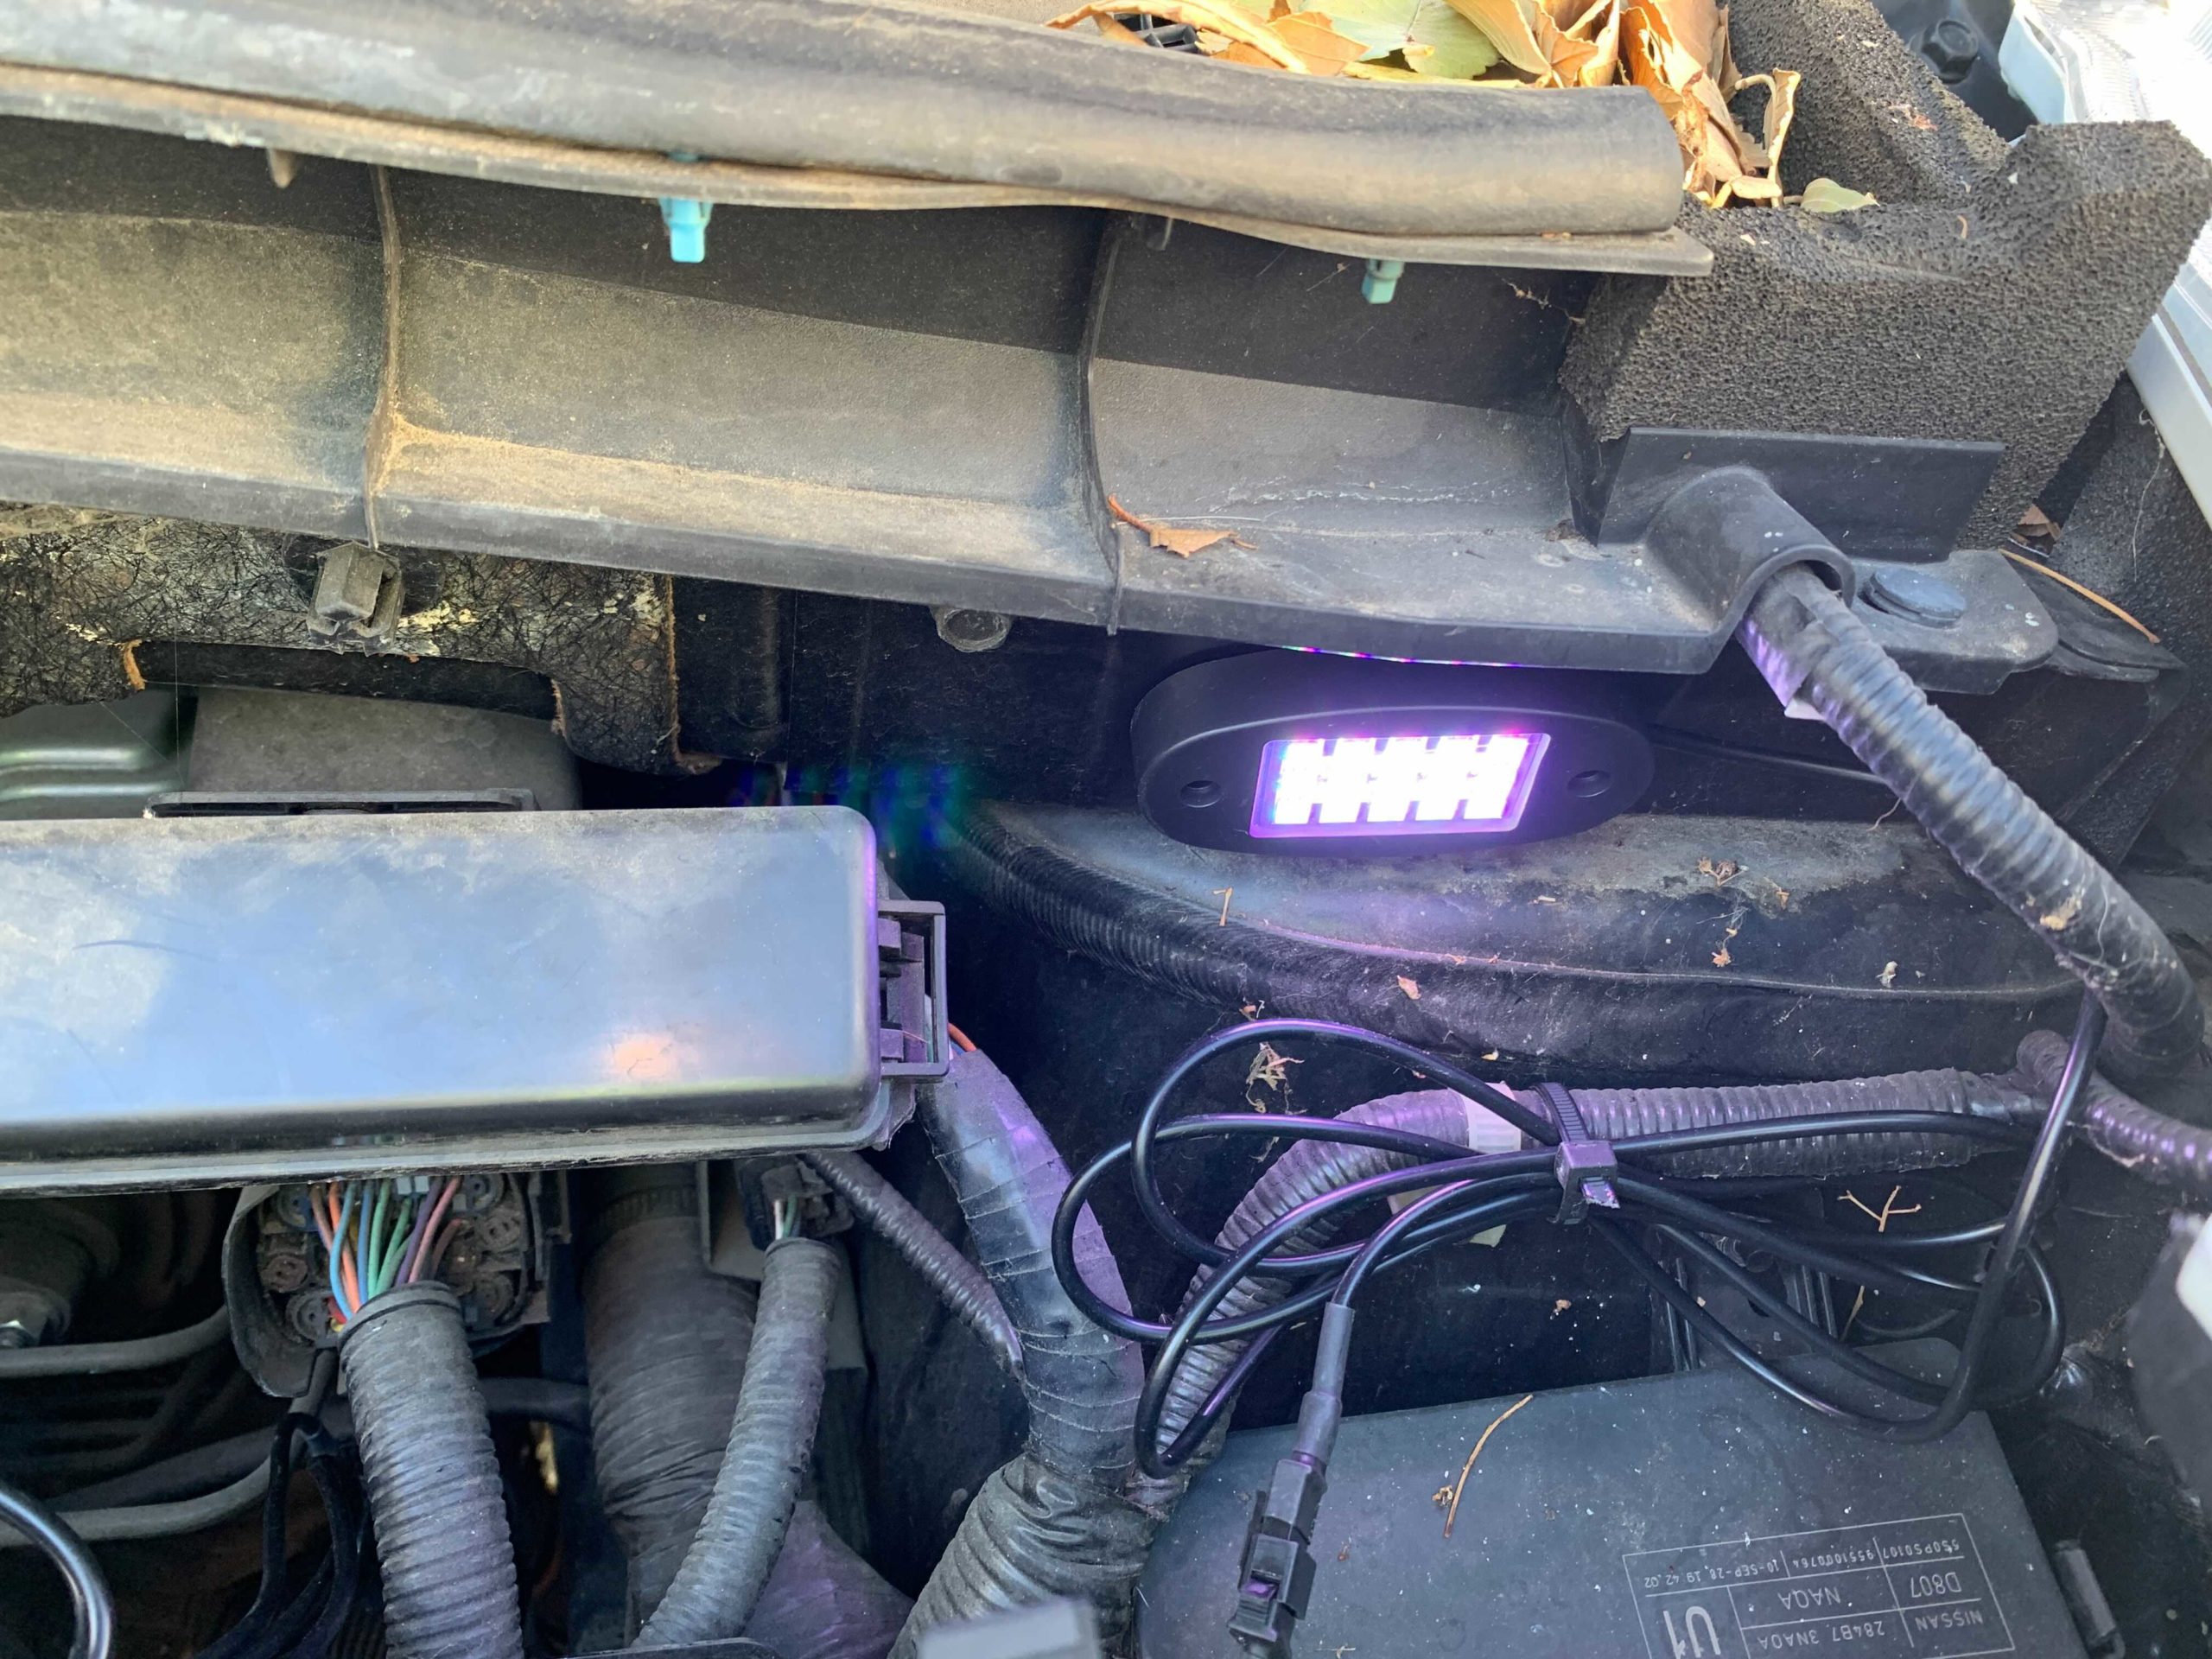 I Put LED Underglow On My Nissan Leaf Because Tesla Can’t Have All The EV Gimmicks